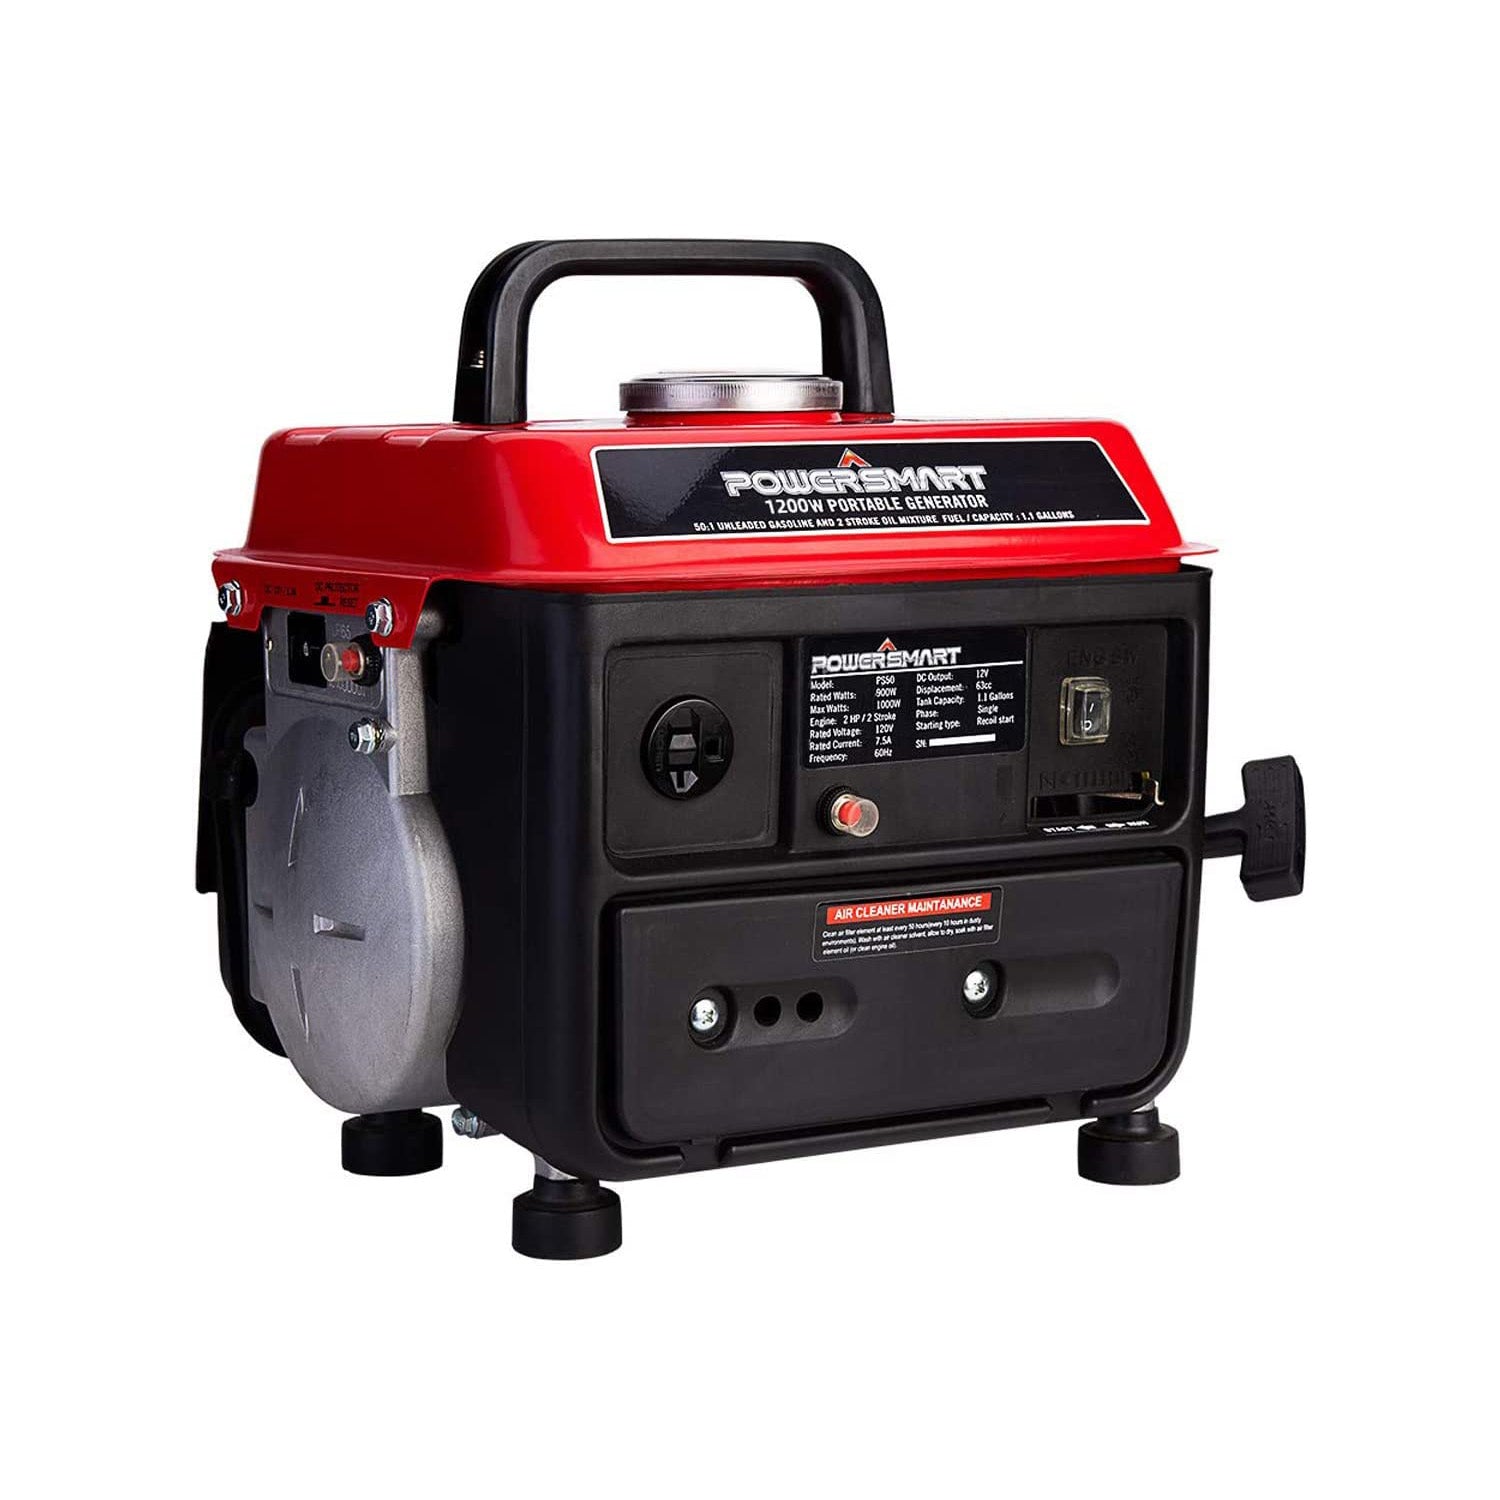 1200W Portable Inverter Generator Outdoor Use PS50